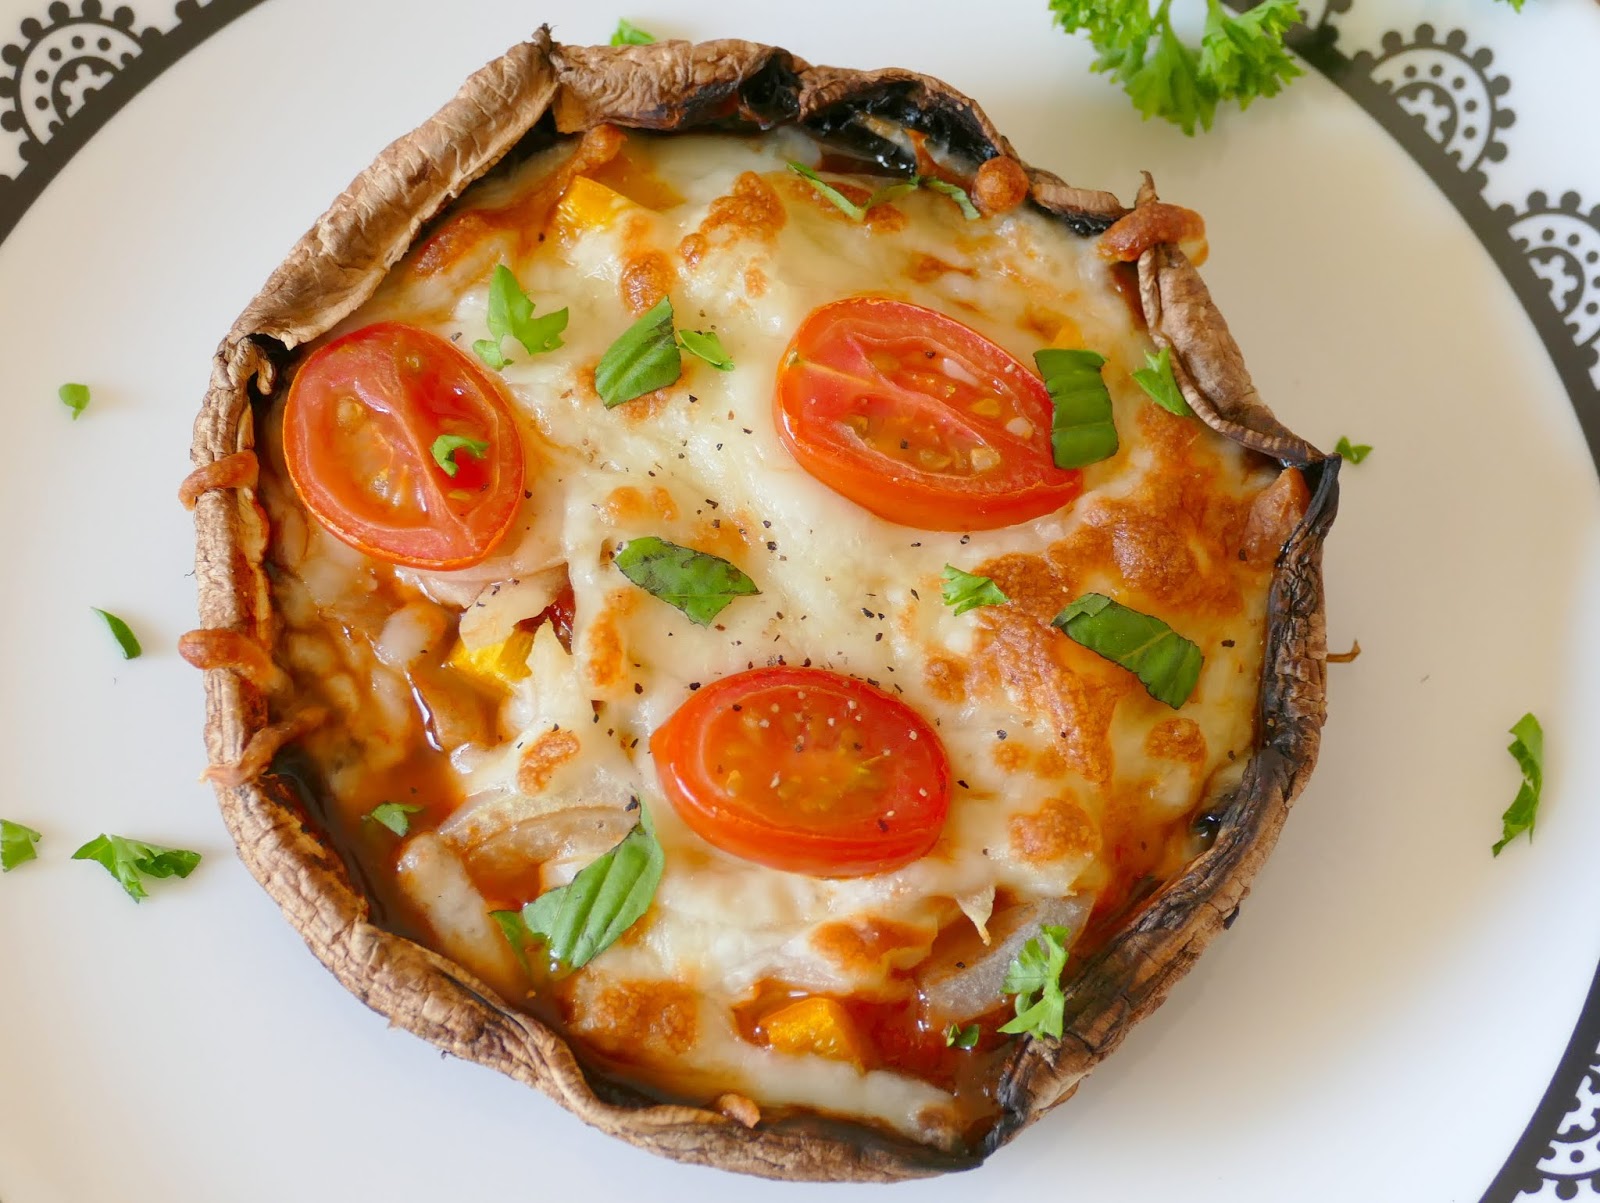 This easy and delicious low carb lunch or dinner recipe is vegetarian, but it would be even more delicious by adding sausage, pepperoni, ham or chicken! Customize with your favorite pizza toppings, herbs or cheese! These portobello mushroom pizzas are a perfect weeknight meal!